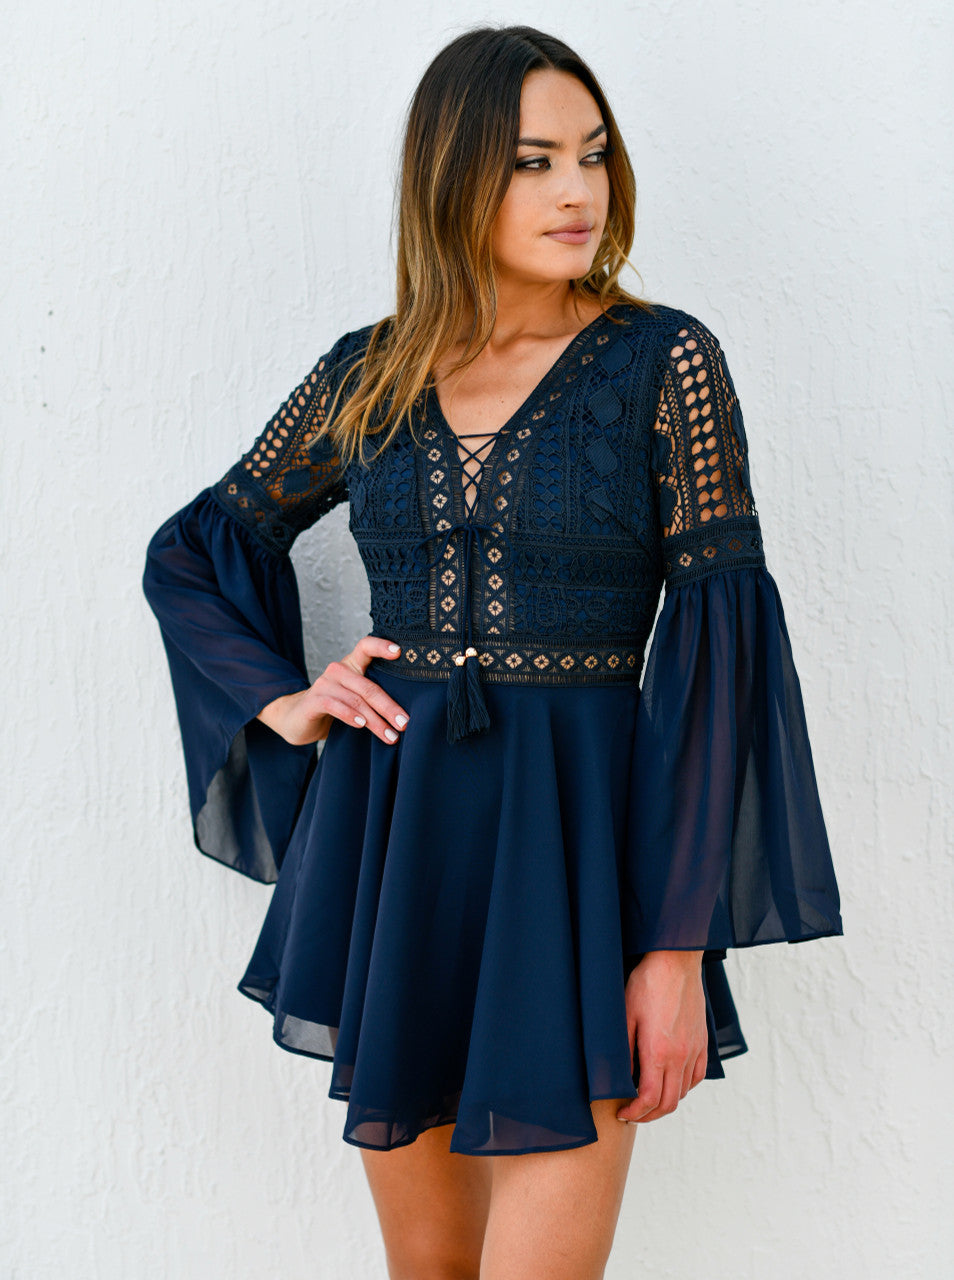 The Alyse Dress in Navy by Two Sisters the Label